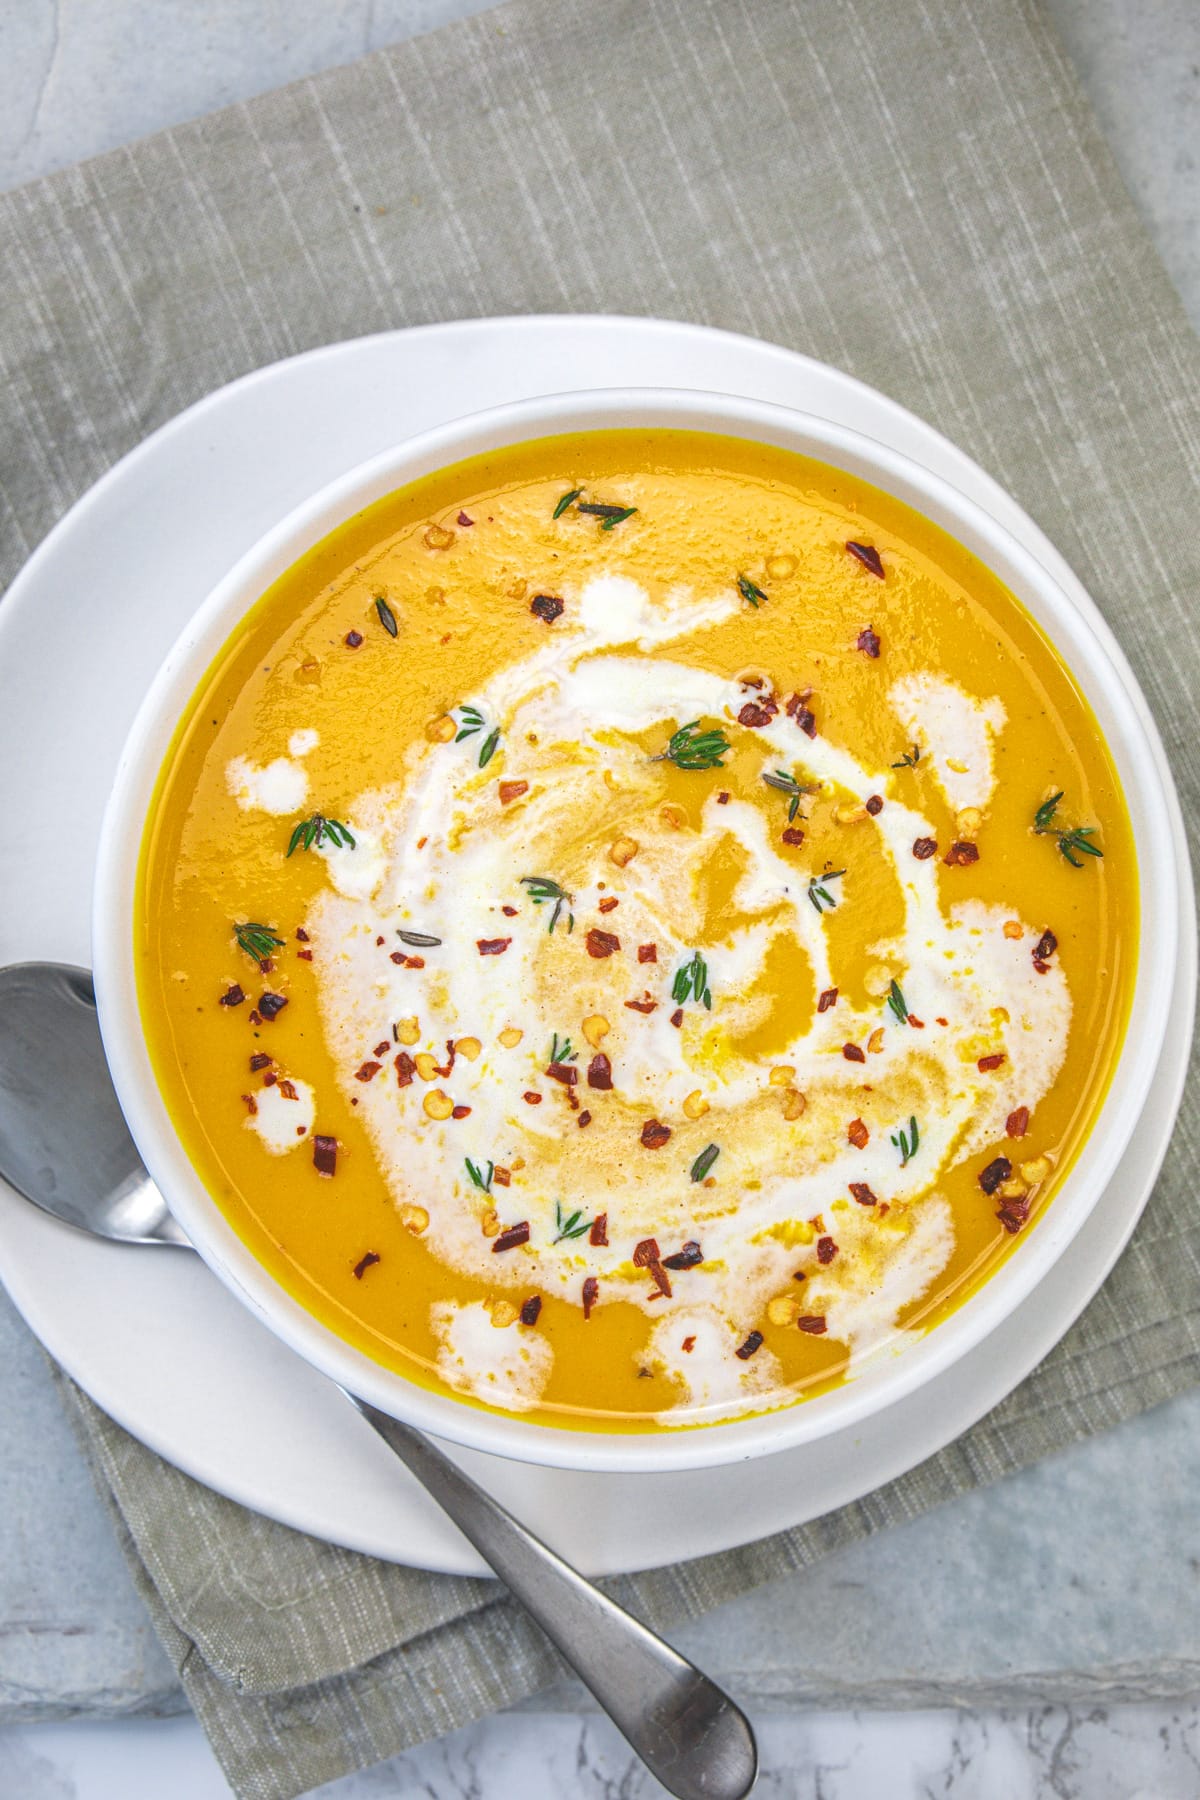 Roasted butternut squash soup served in a bowl with a spoon on the side.